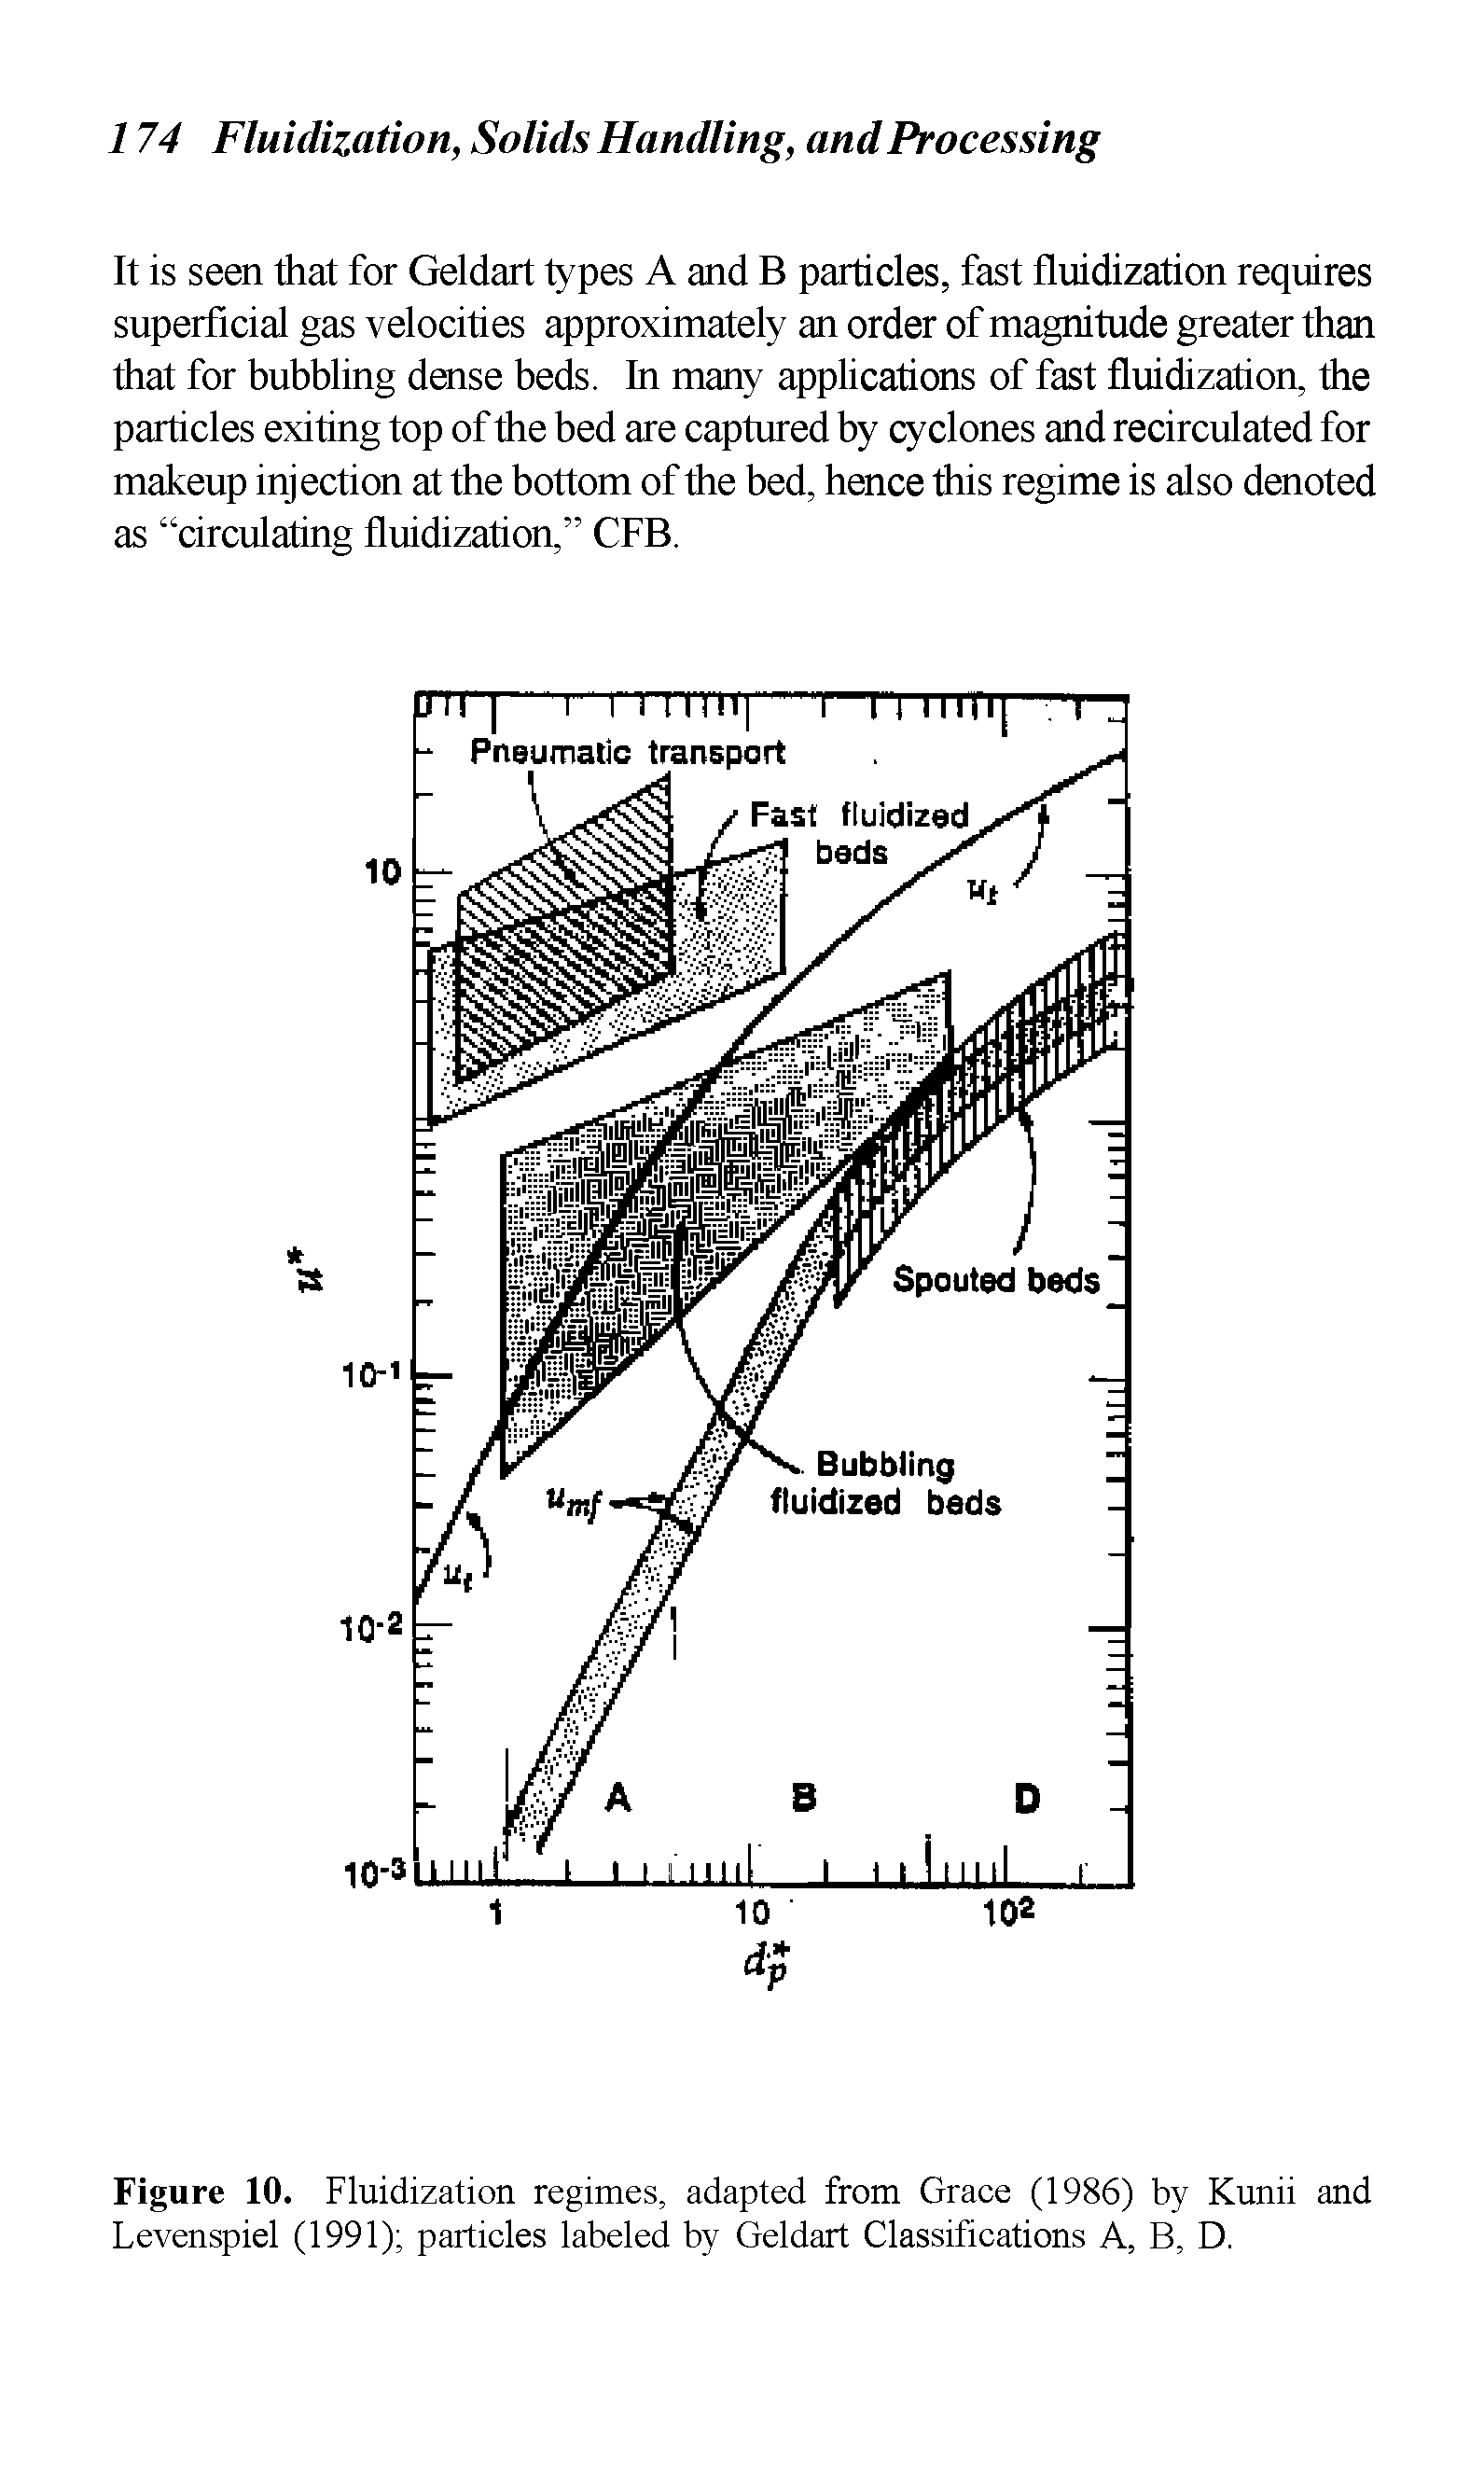 Figure 10. Fluidization regimes, adapted from Grace (1986) by Kunii and Levenspiel (1991) particles labeled by Geldart Classifications A, B, D.